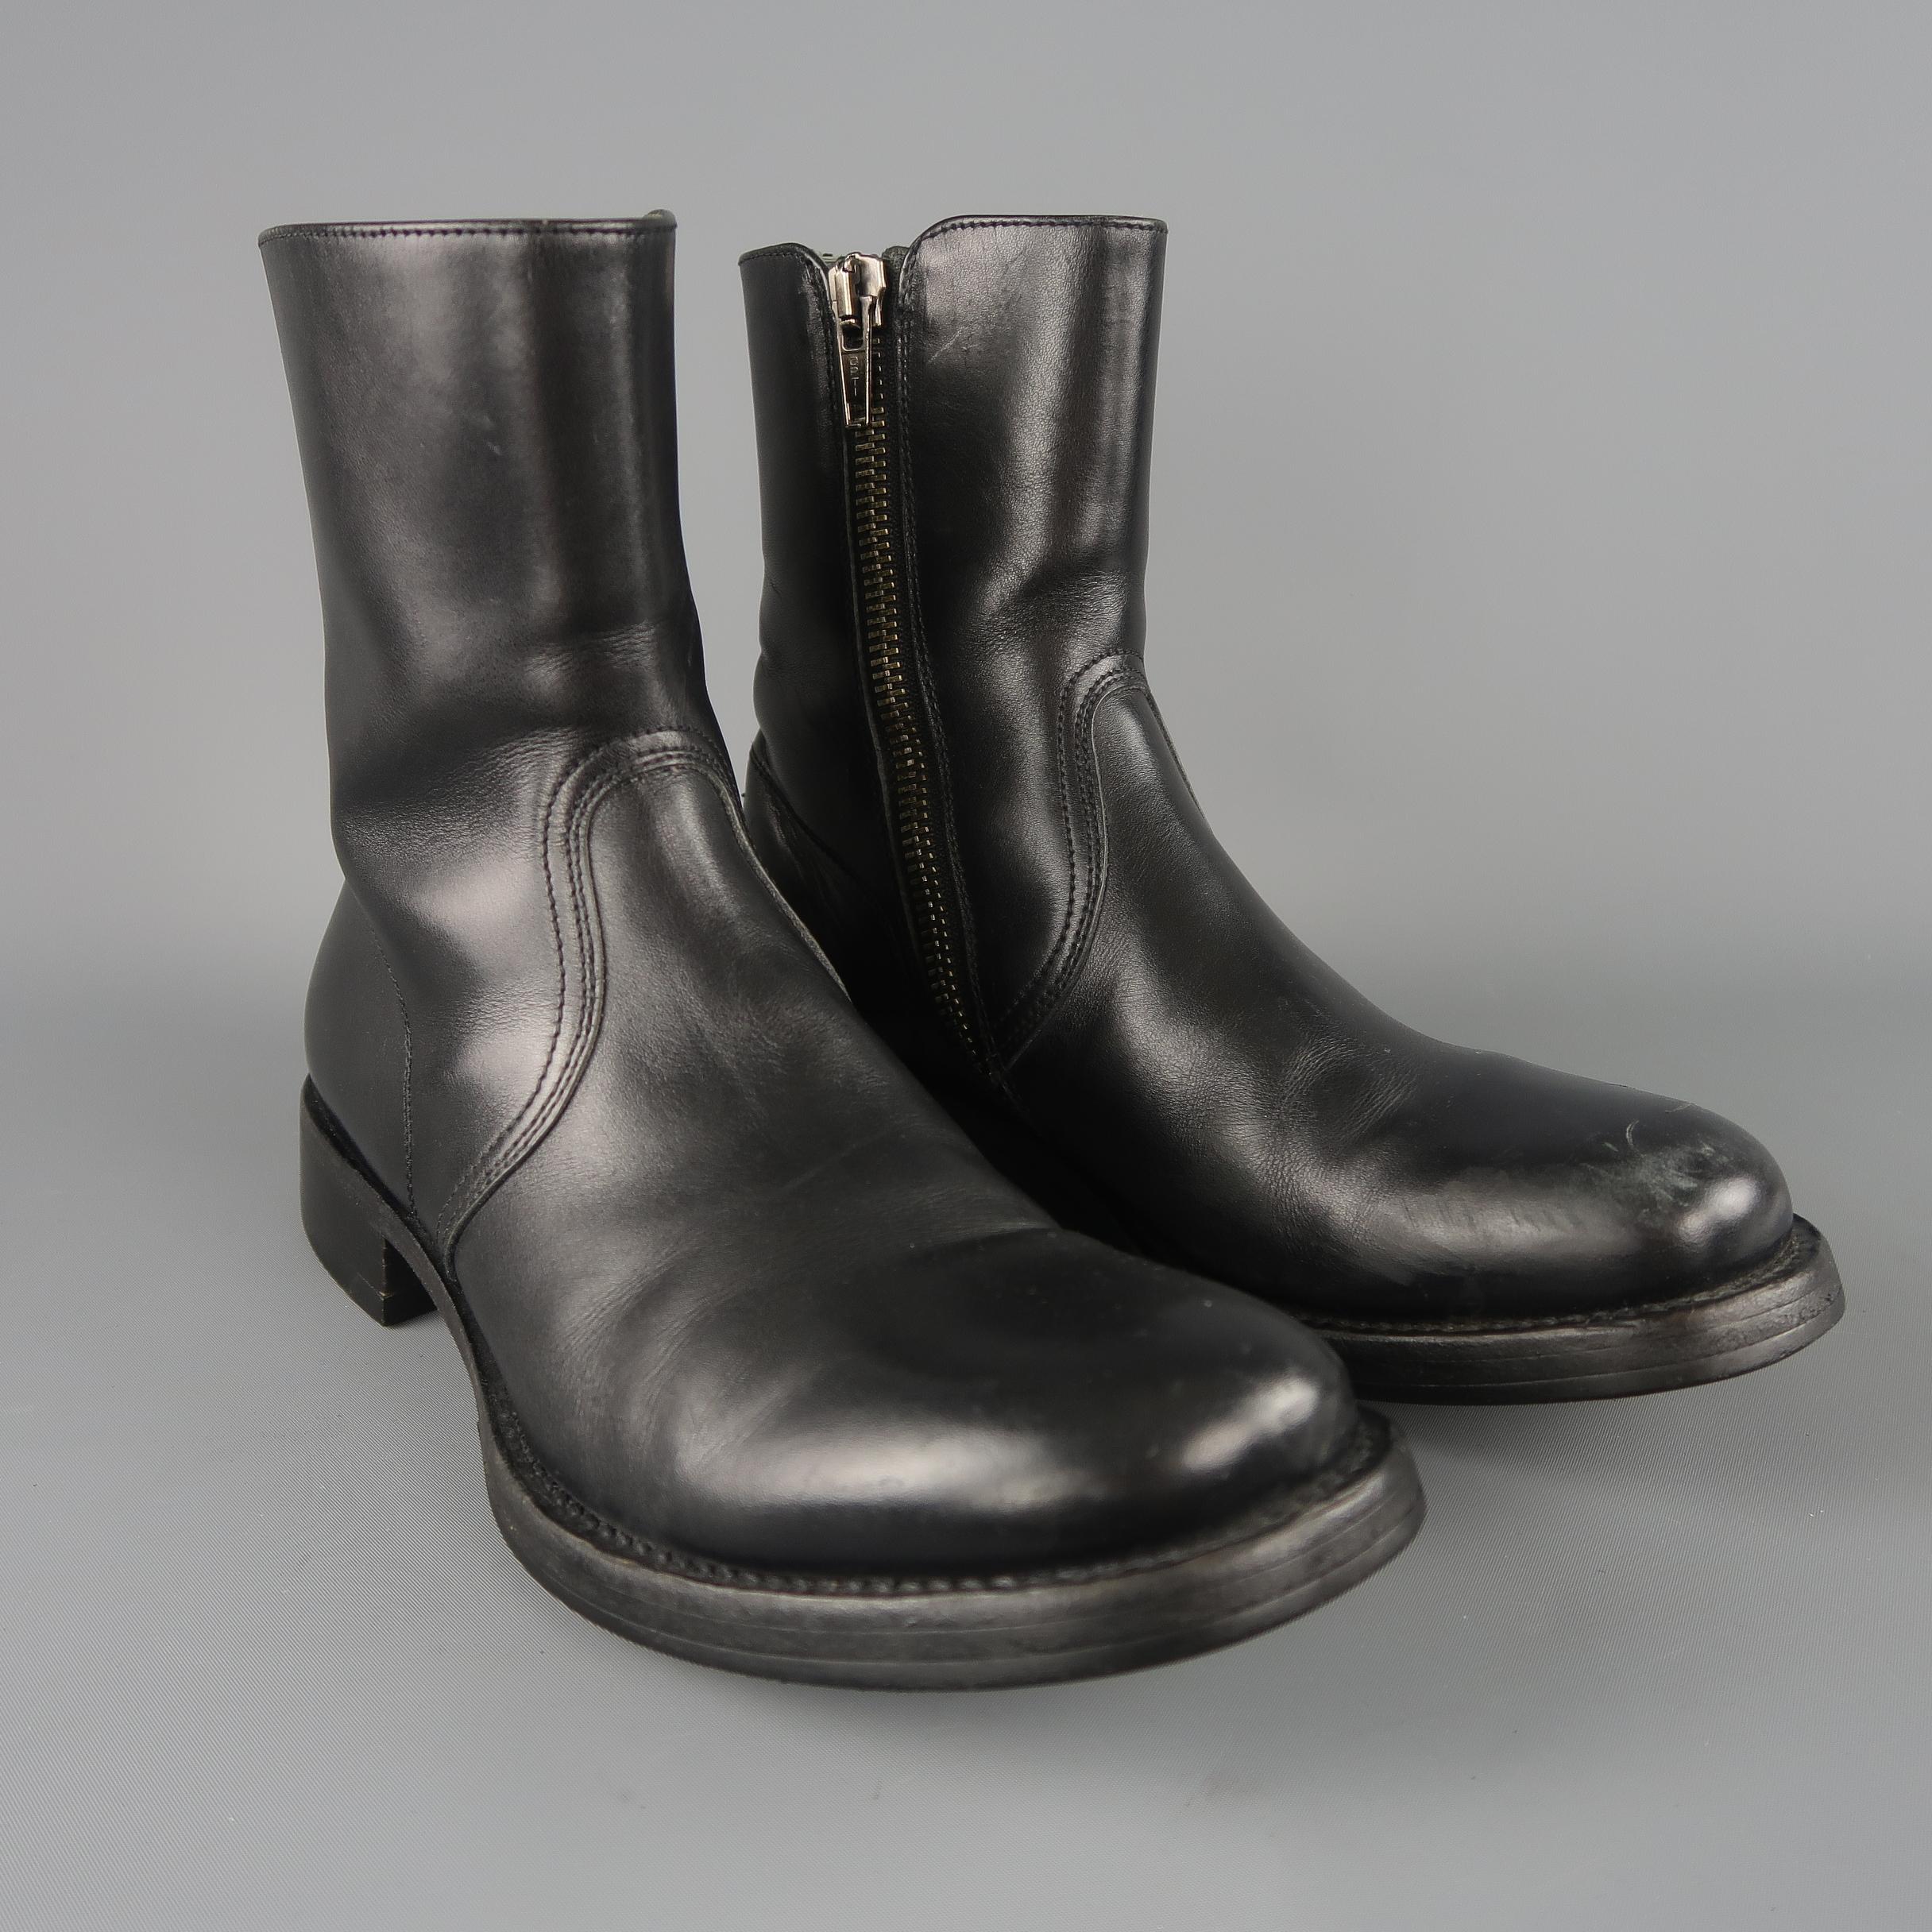 Archive Miu Miu men's ankle boots come in smooth black leather with a tapered round toe, stacked heeled sole, and inner zip closure.  Made in Italy.
 
Good Pre-Owned Condition.
Marked: UK 7
 
Measurements:
 
Length: 7.5 in.